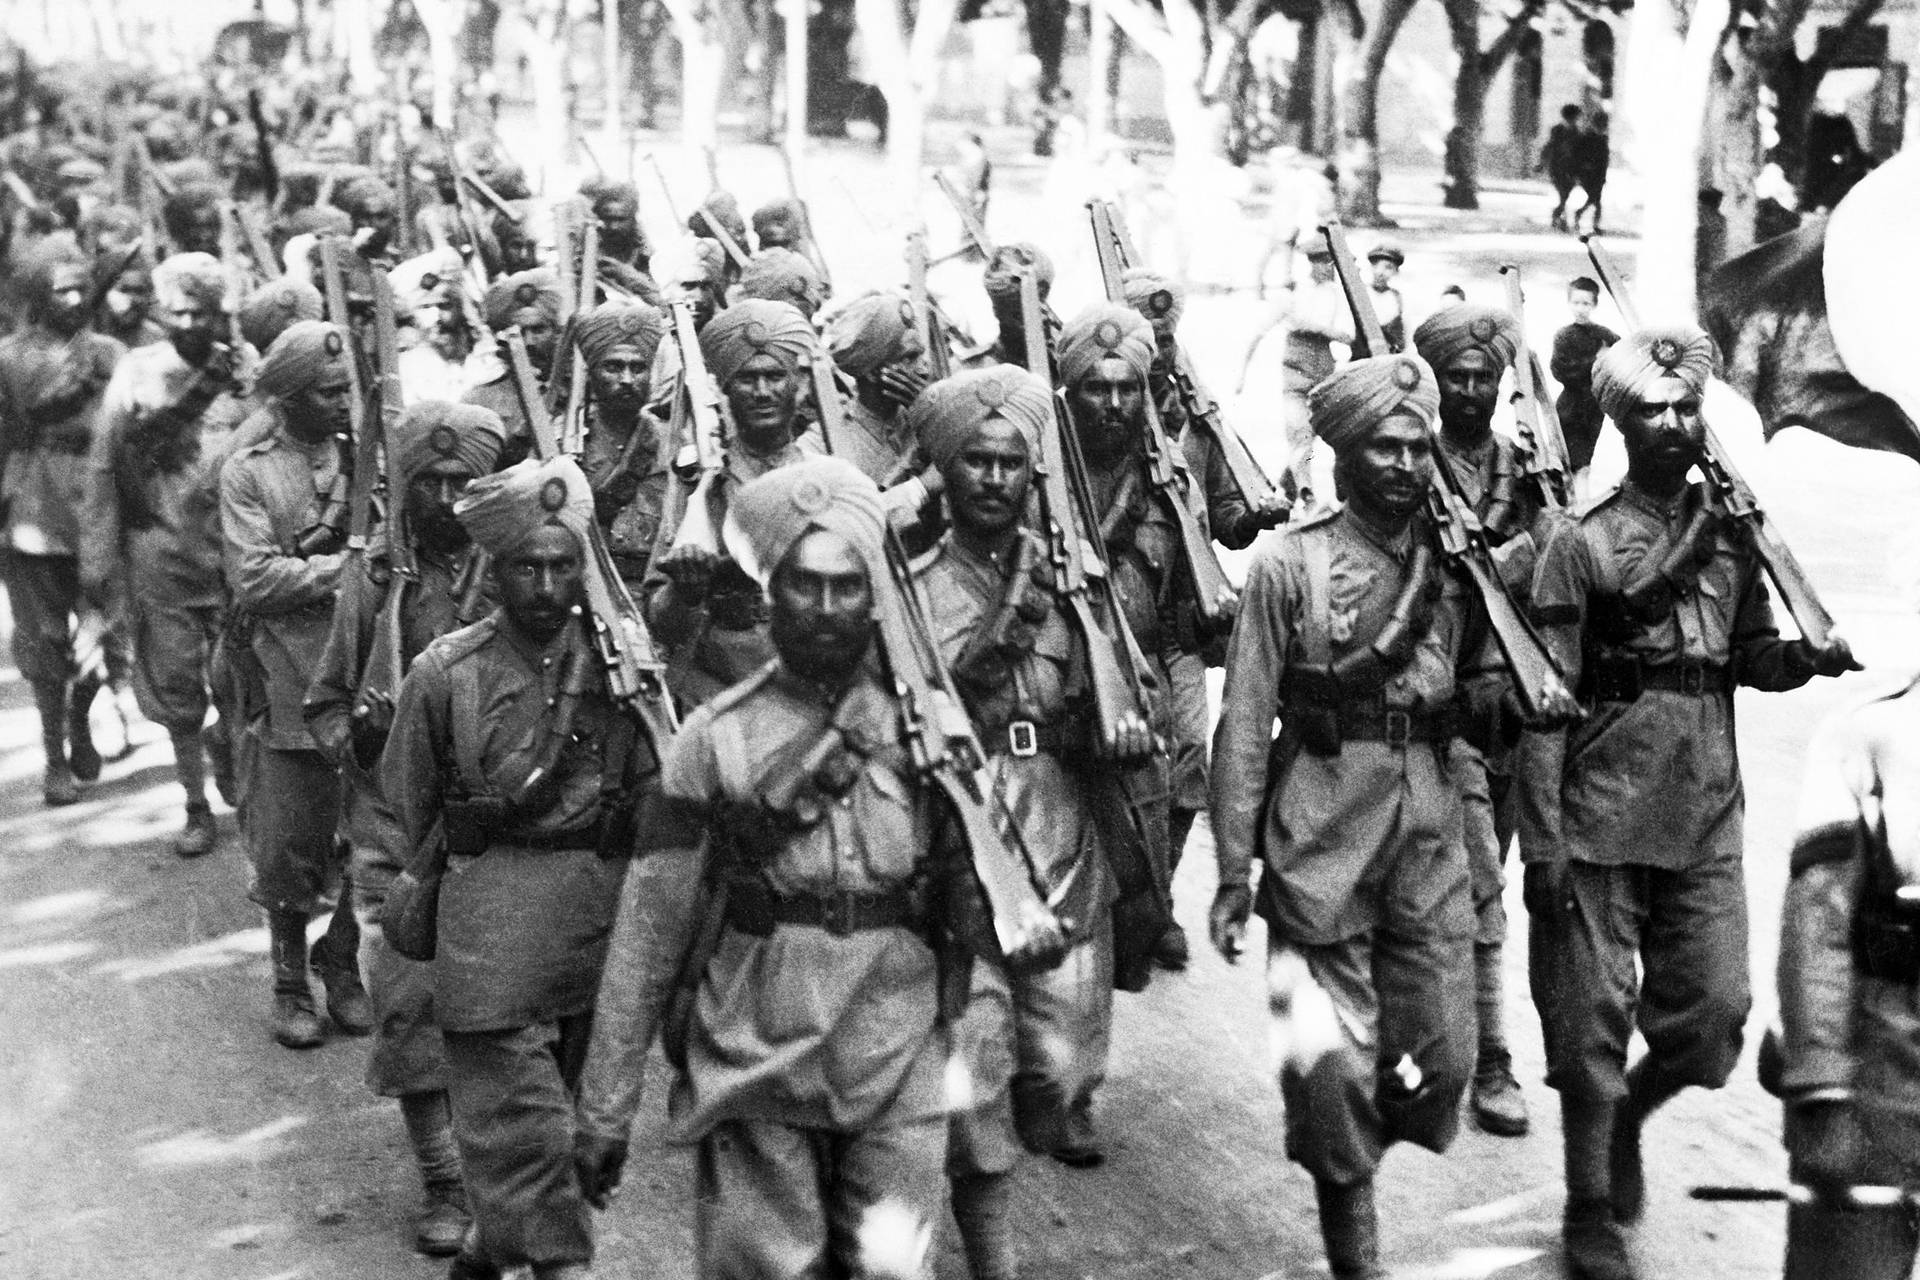 Indian Soldiers In World War 1 Wallpaper